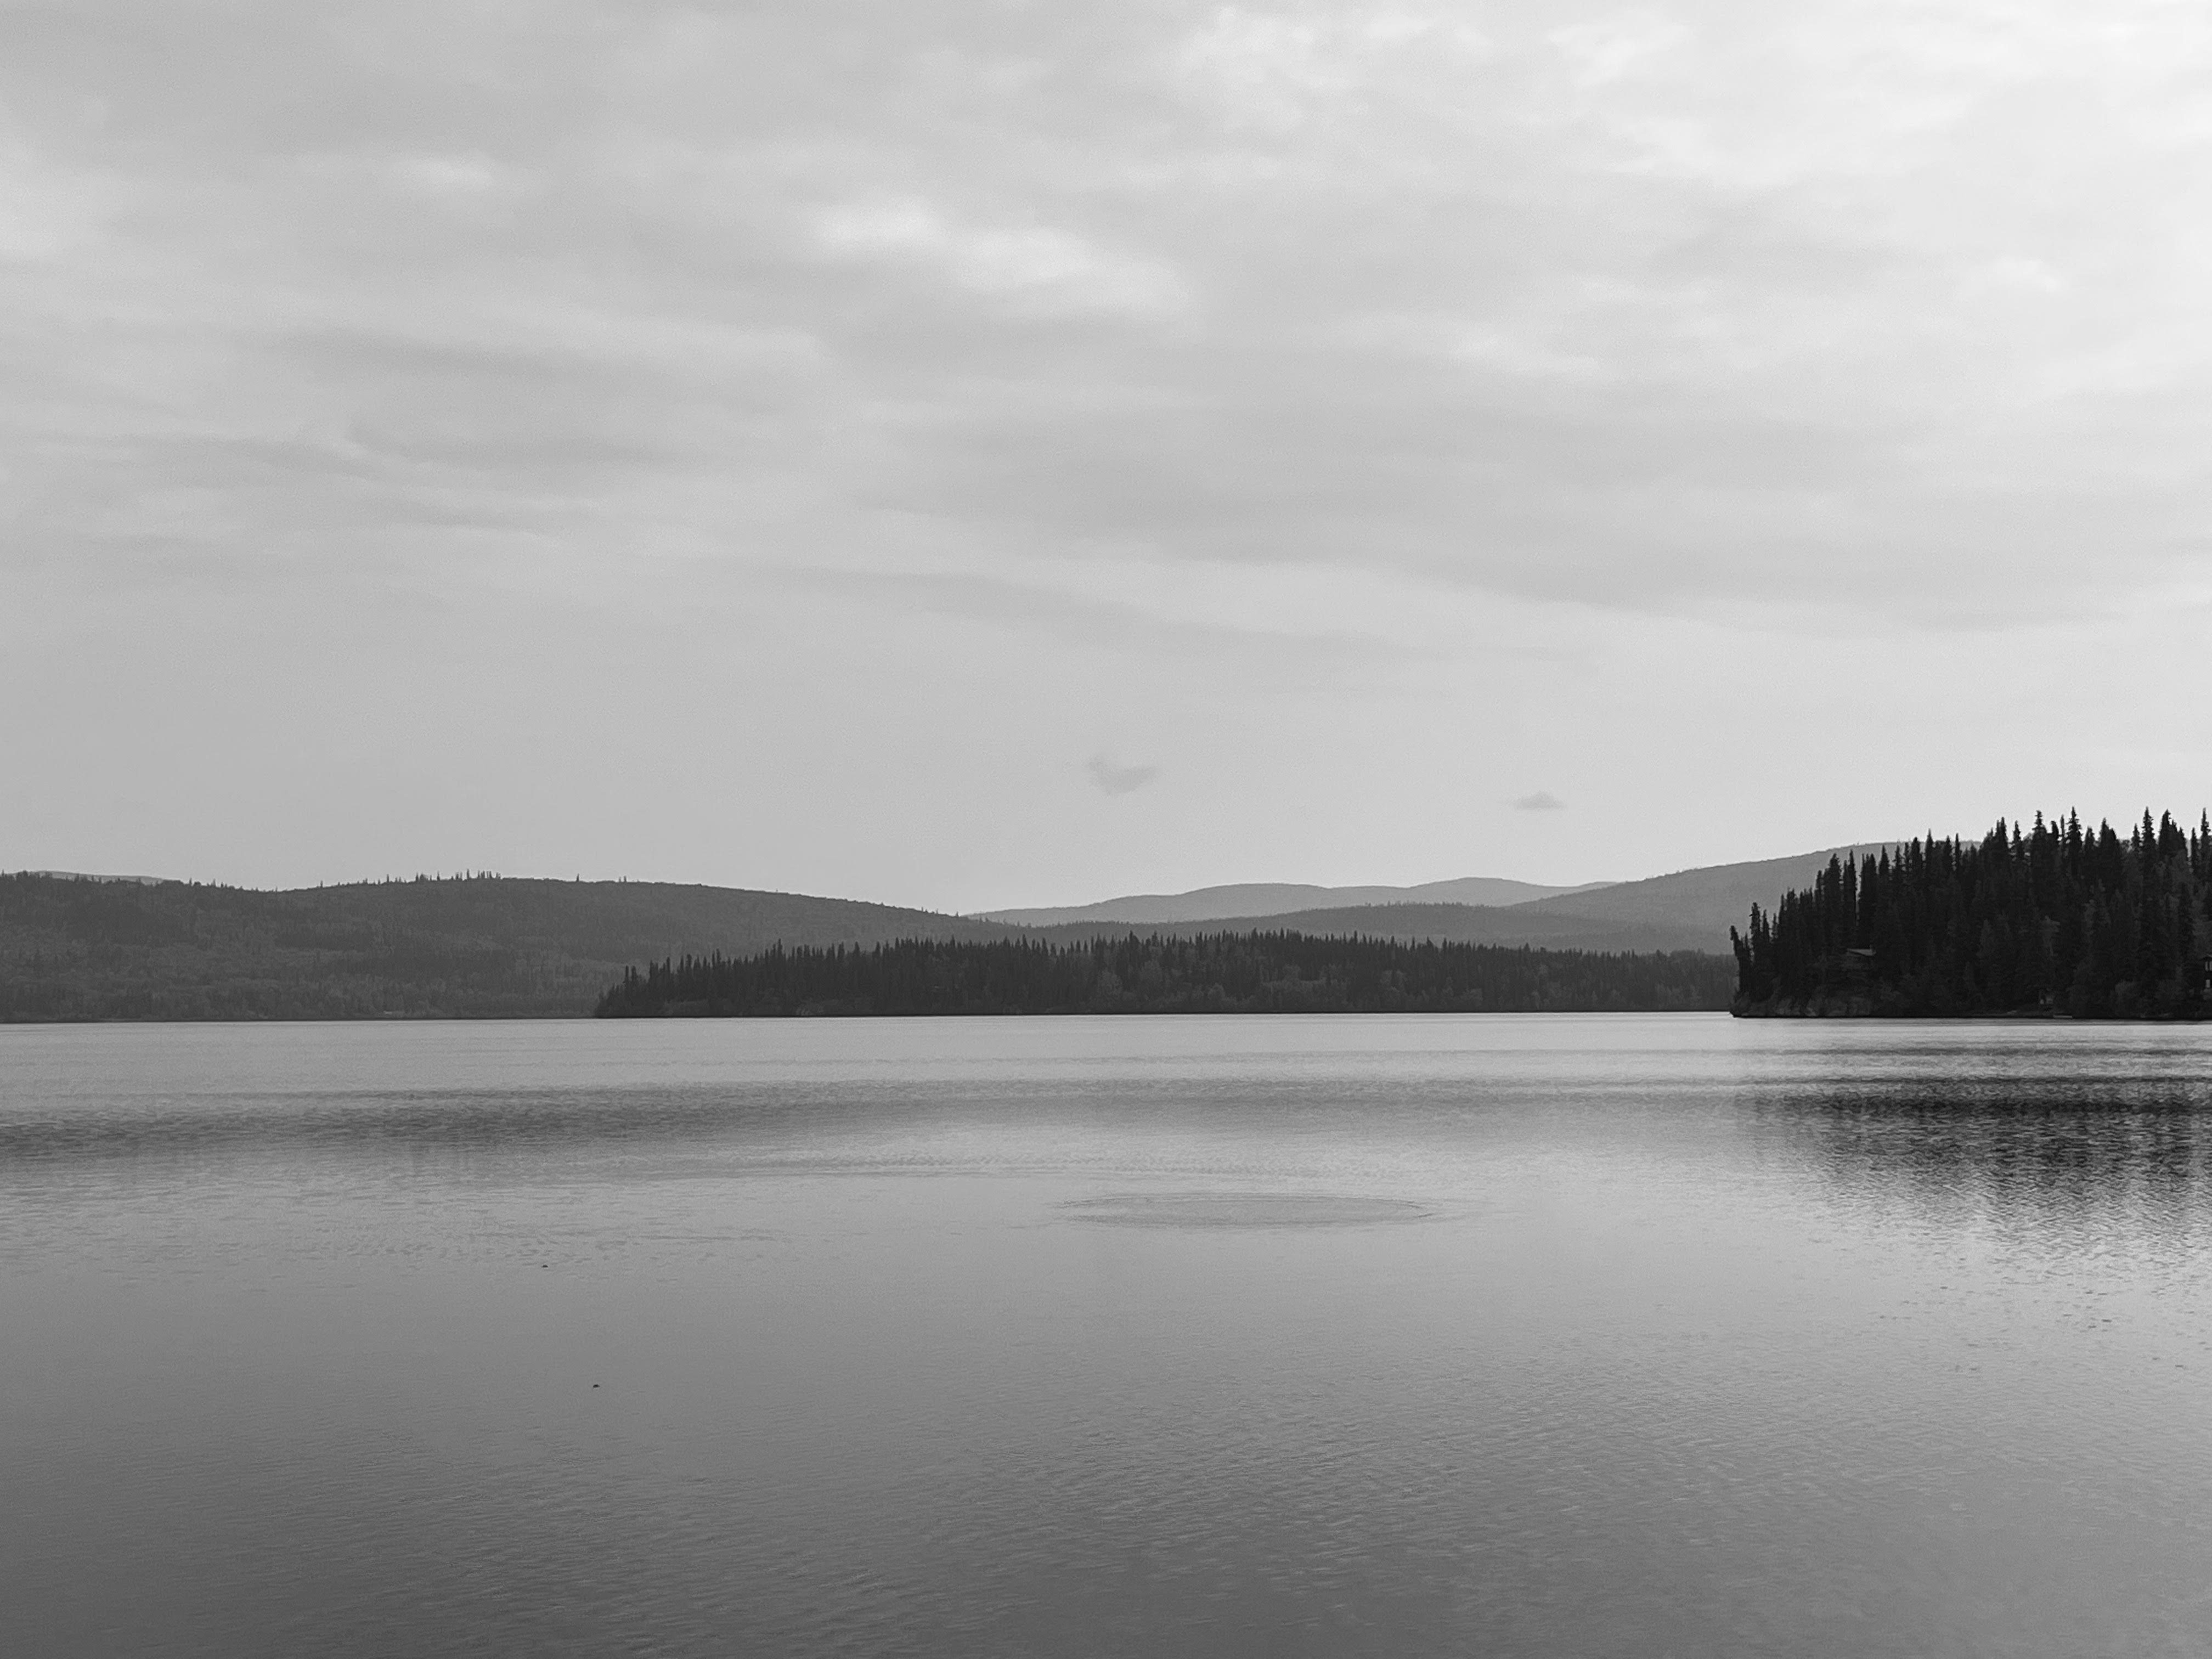 Black and white photo of a calm lake disturbed only by a ring of spreading ripples. The lake is surrounded by vast evergreen forest and low, rolling mountains meet an overcast sky in the distance.